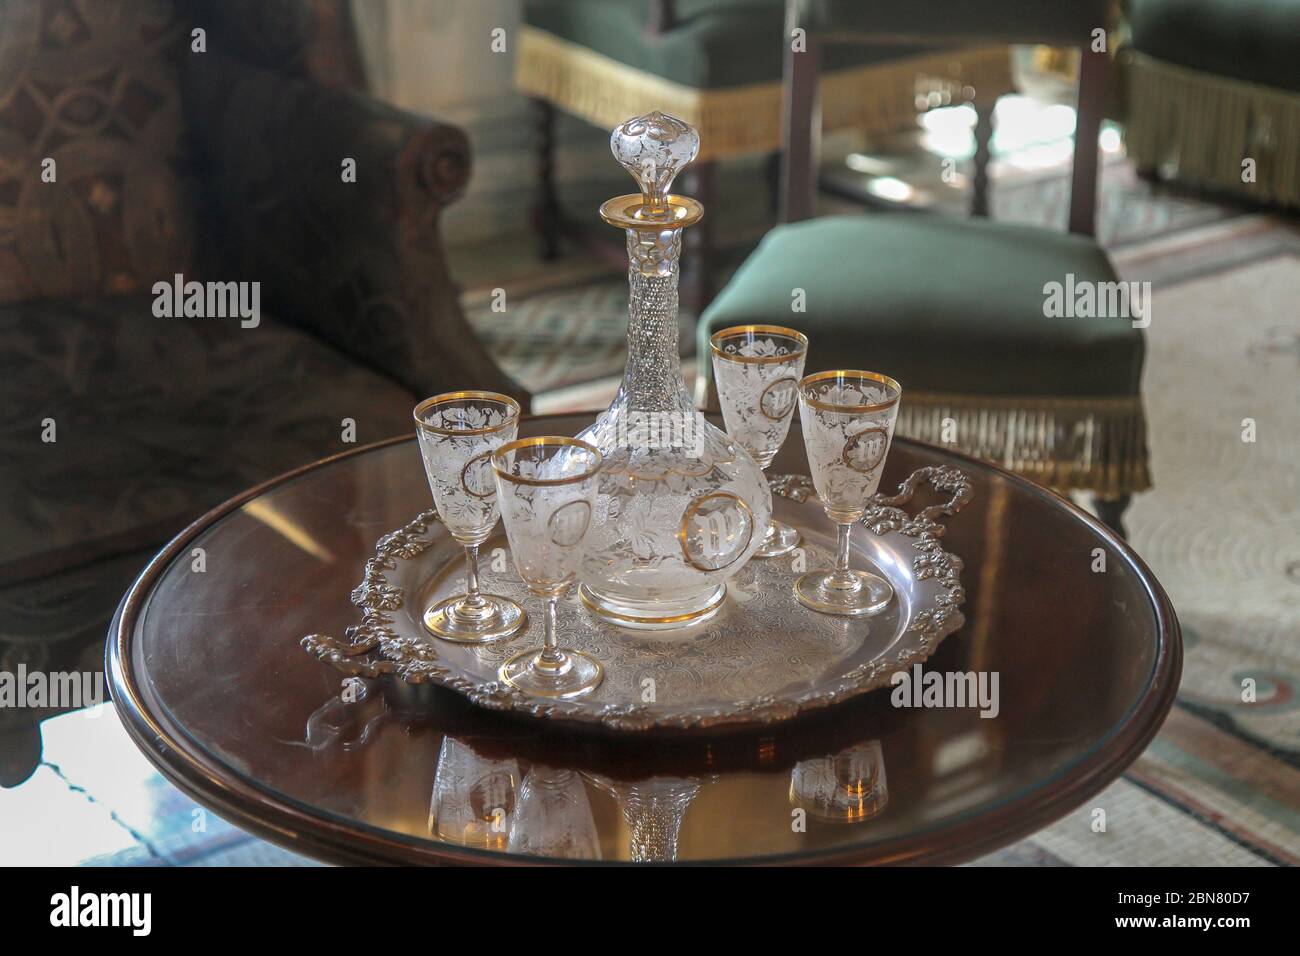 Glassware displayed at the Breakers mansion, Newport, Rhode Island, United States Stock Photo